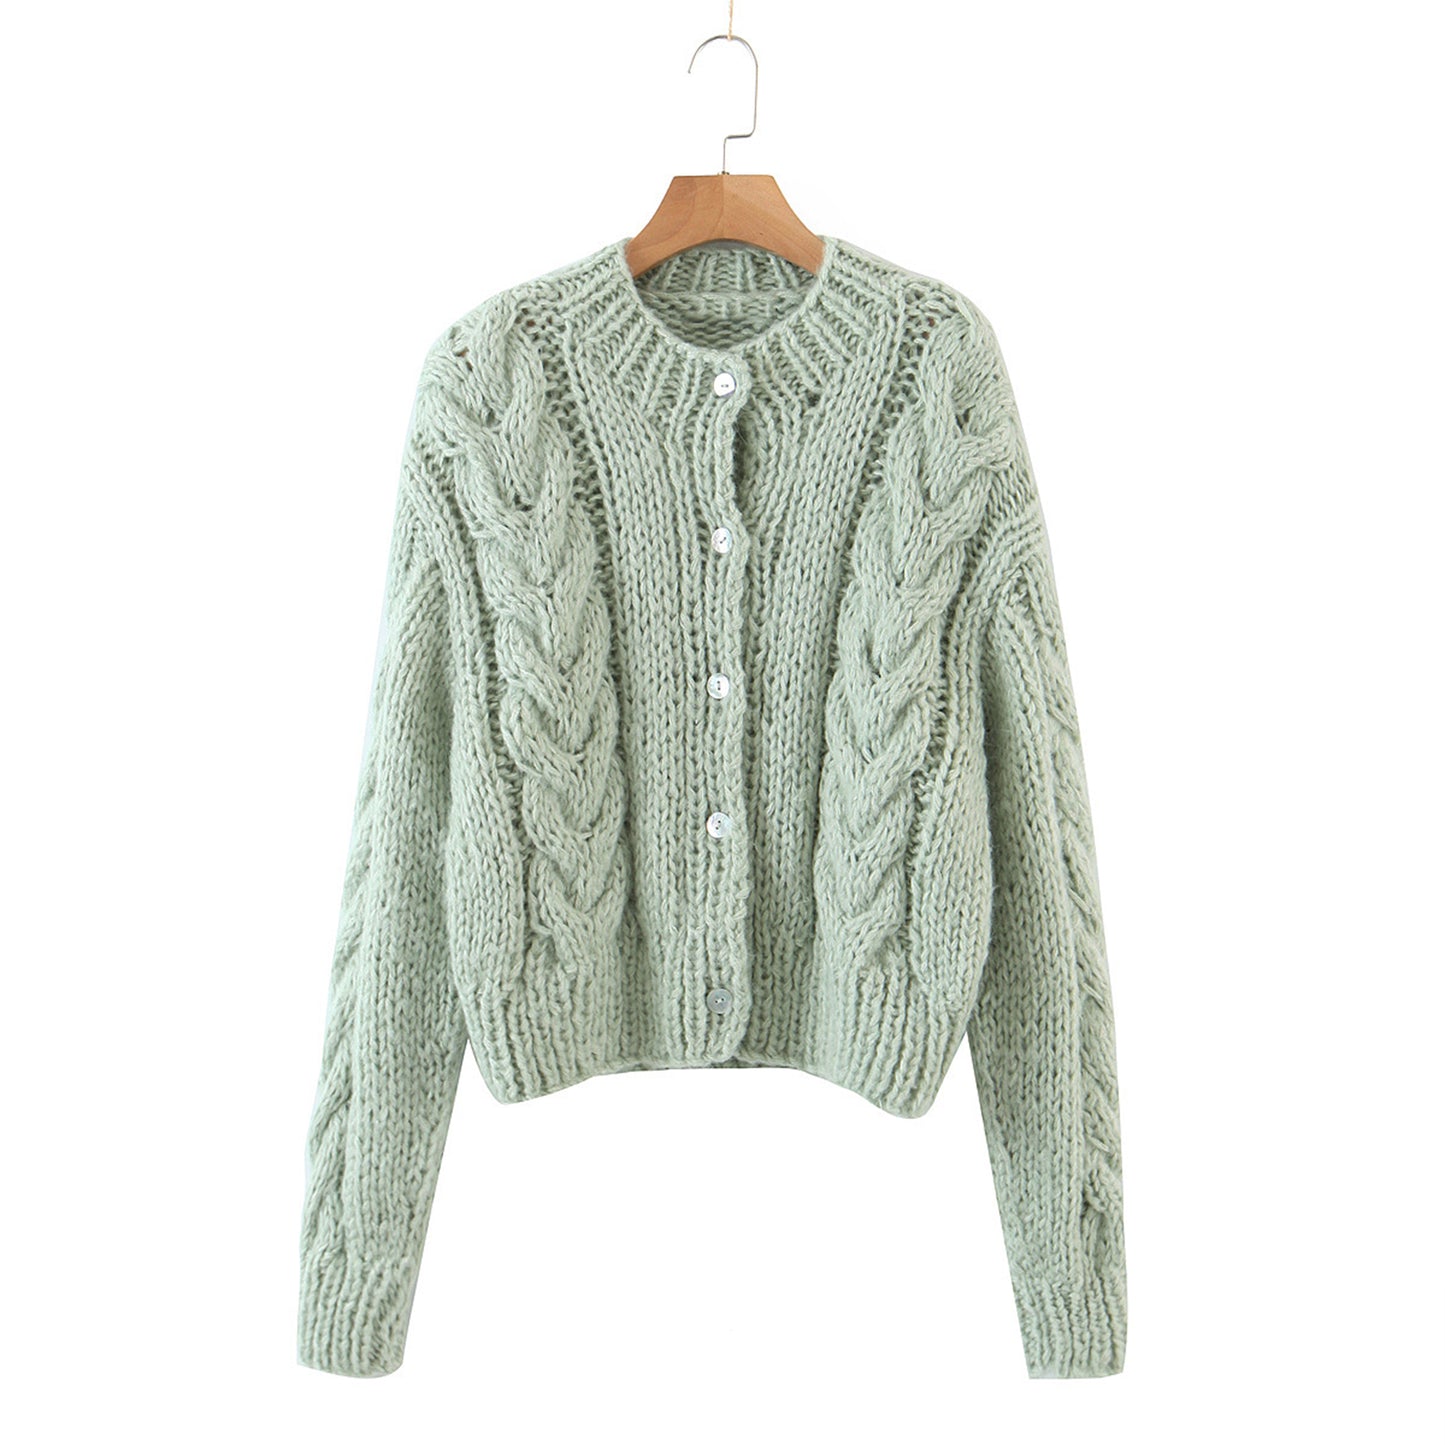 Knitted Sweater Women's Mohair Wool Loose Cardigan Jacket, Knit Top, Handmade Clothing, Gift For Women, Hand-knit Outfit